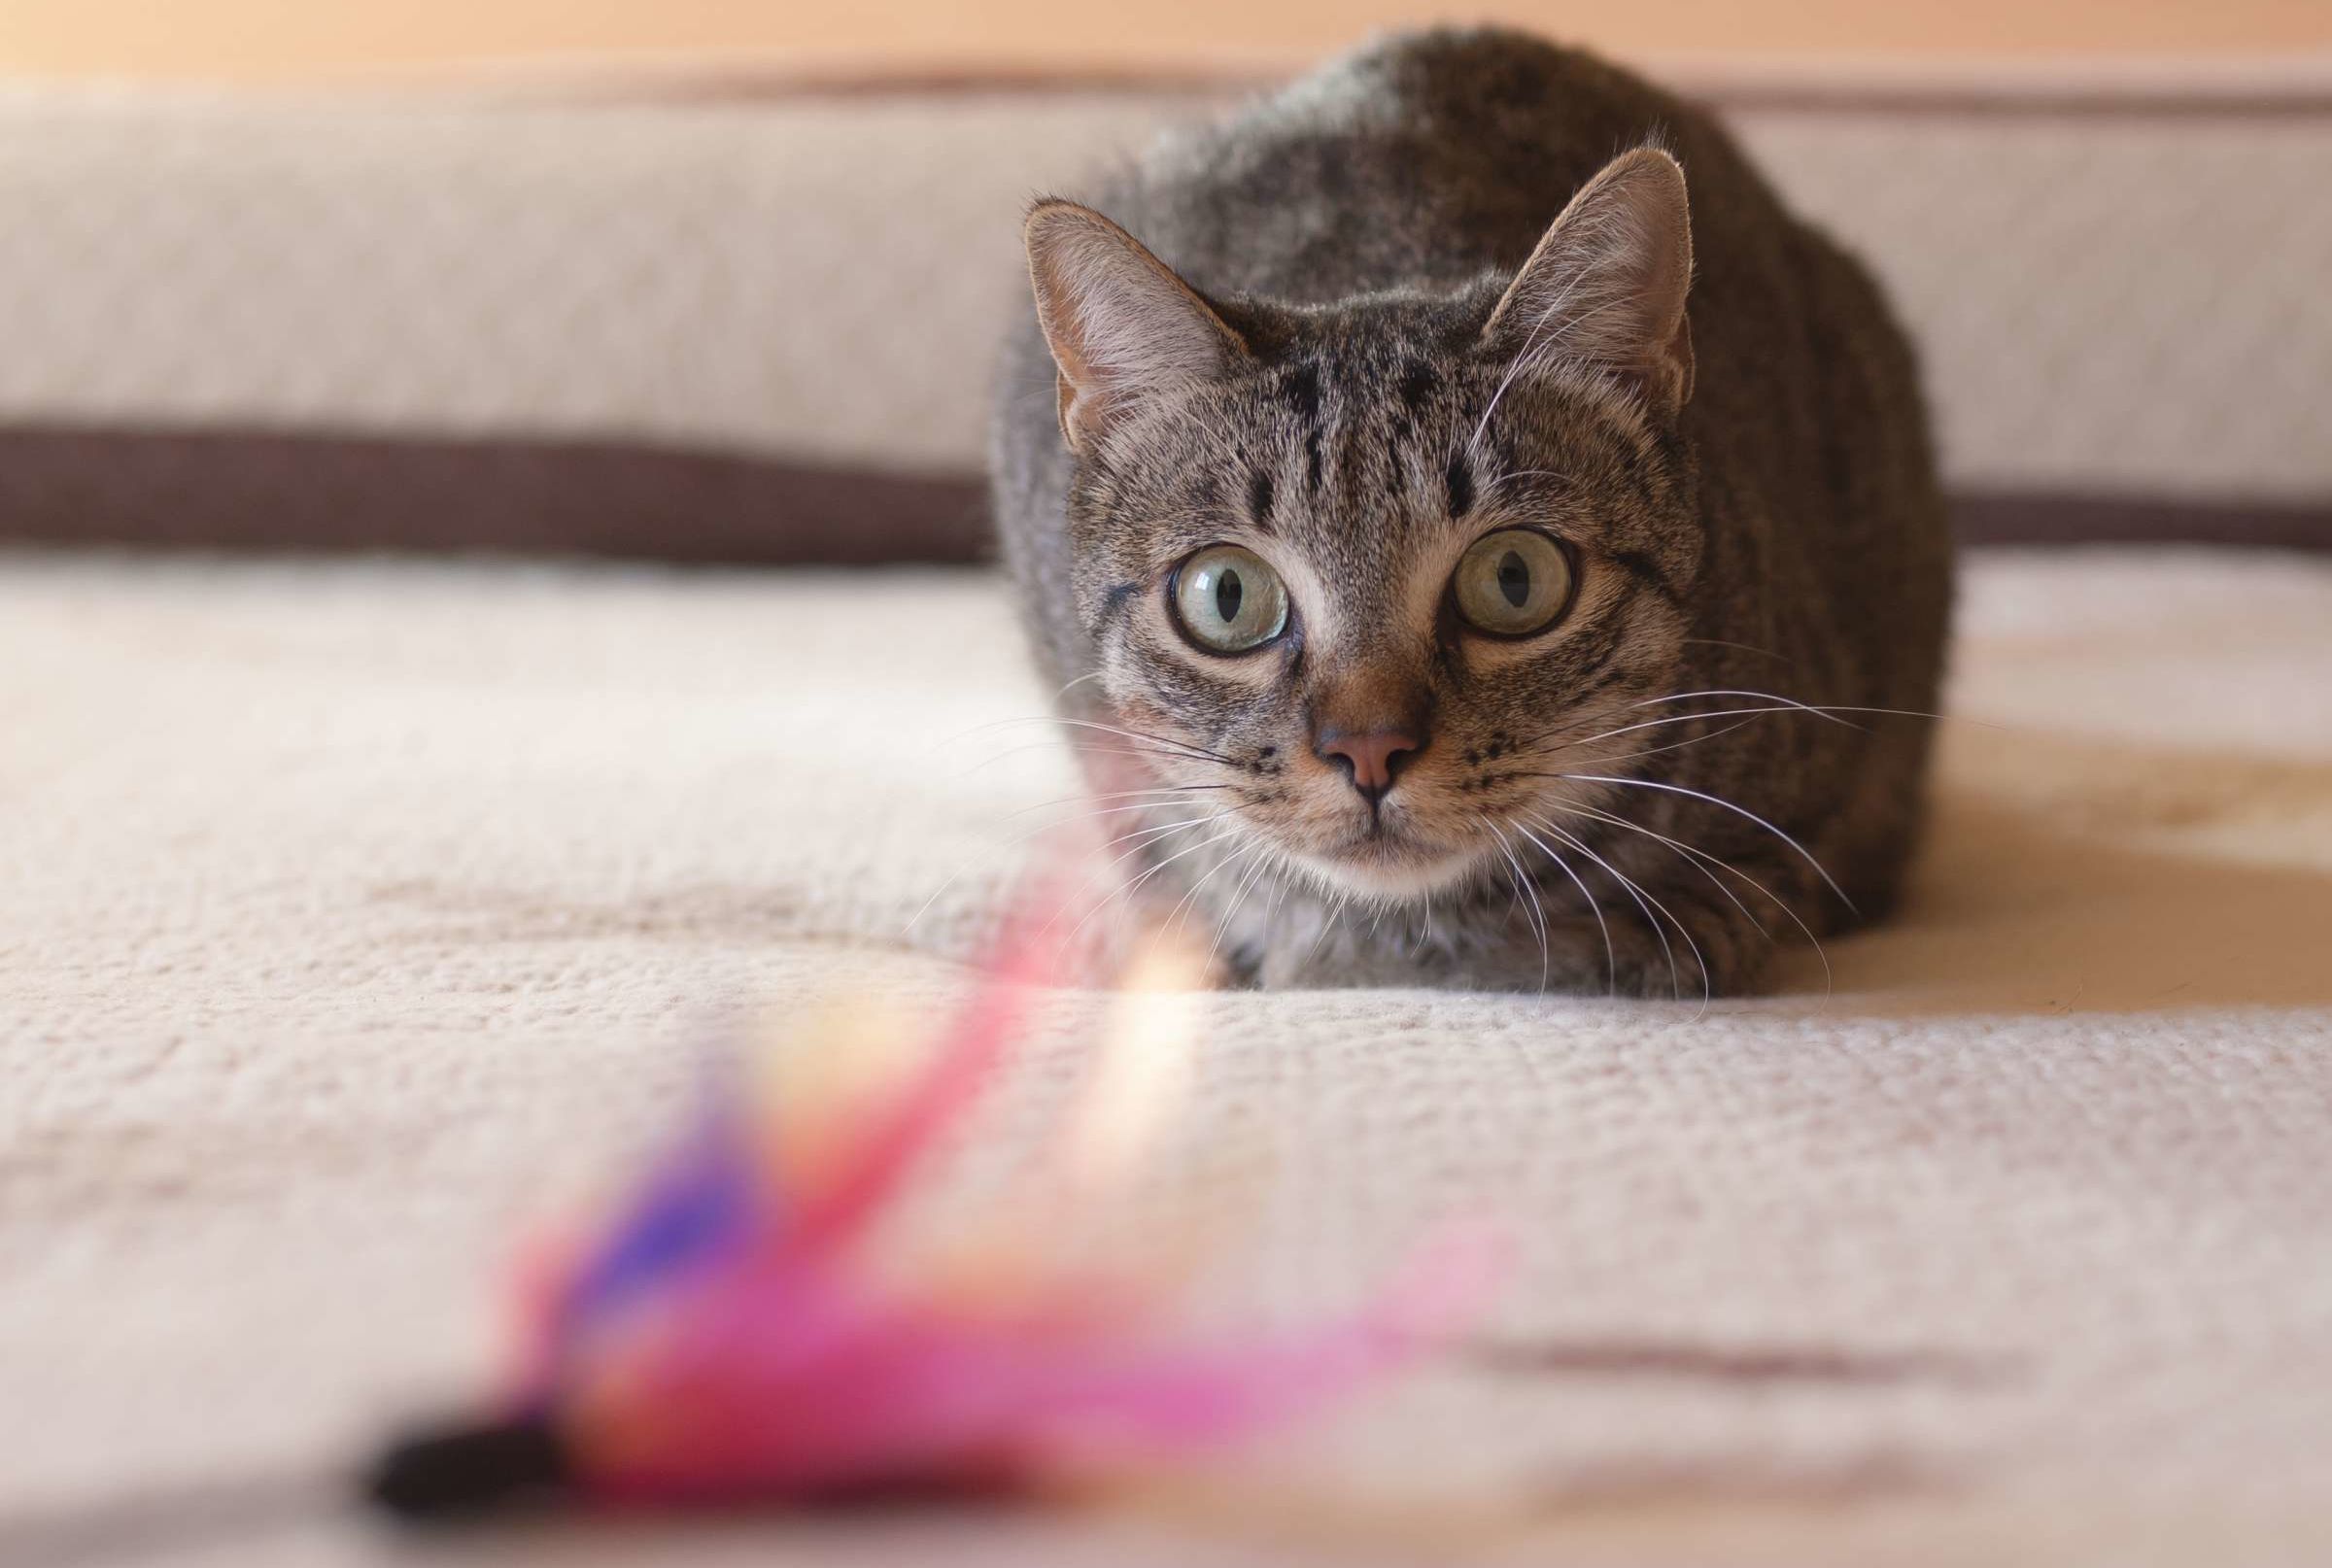 Why Do Cats Their Butts Before Pounce? | Mental Floss